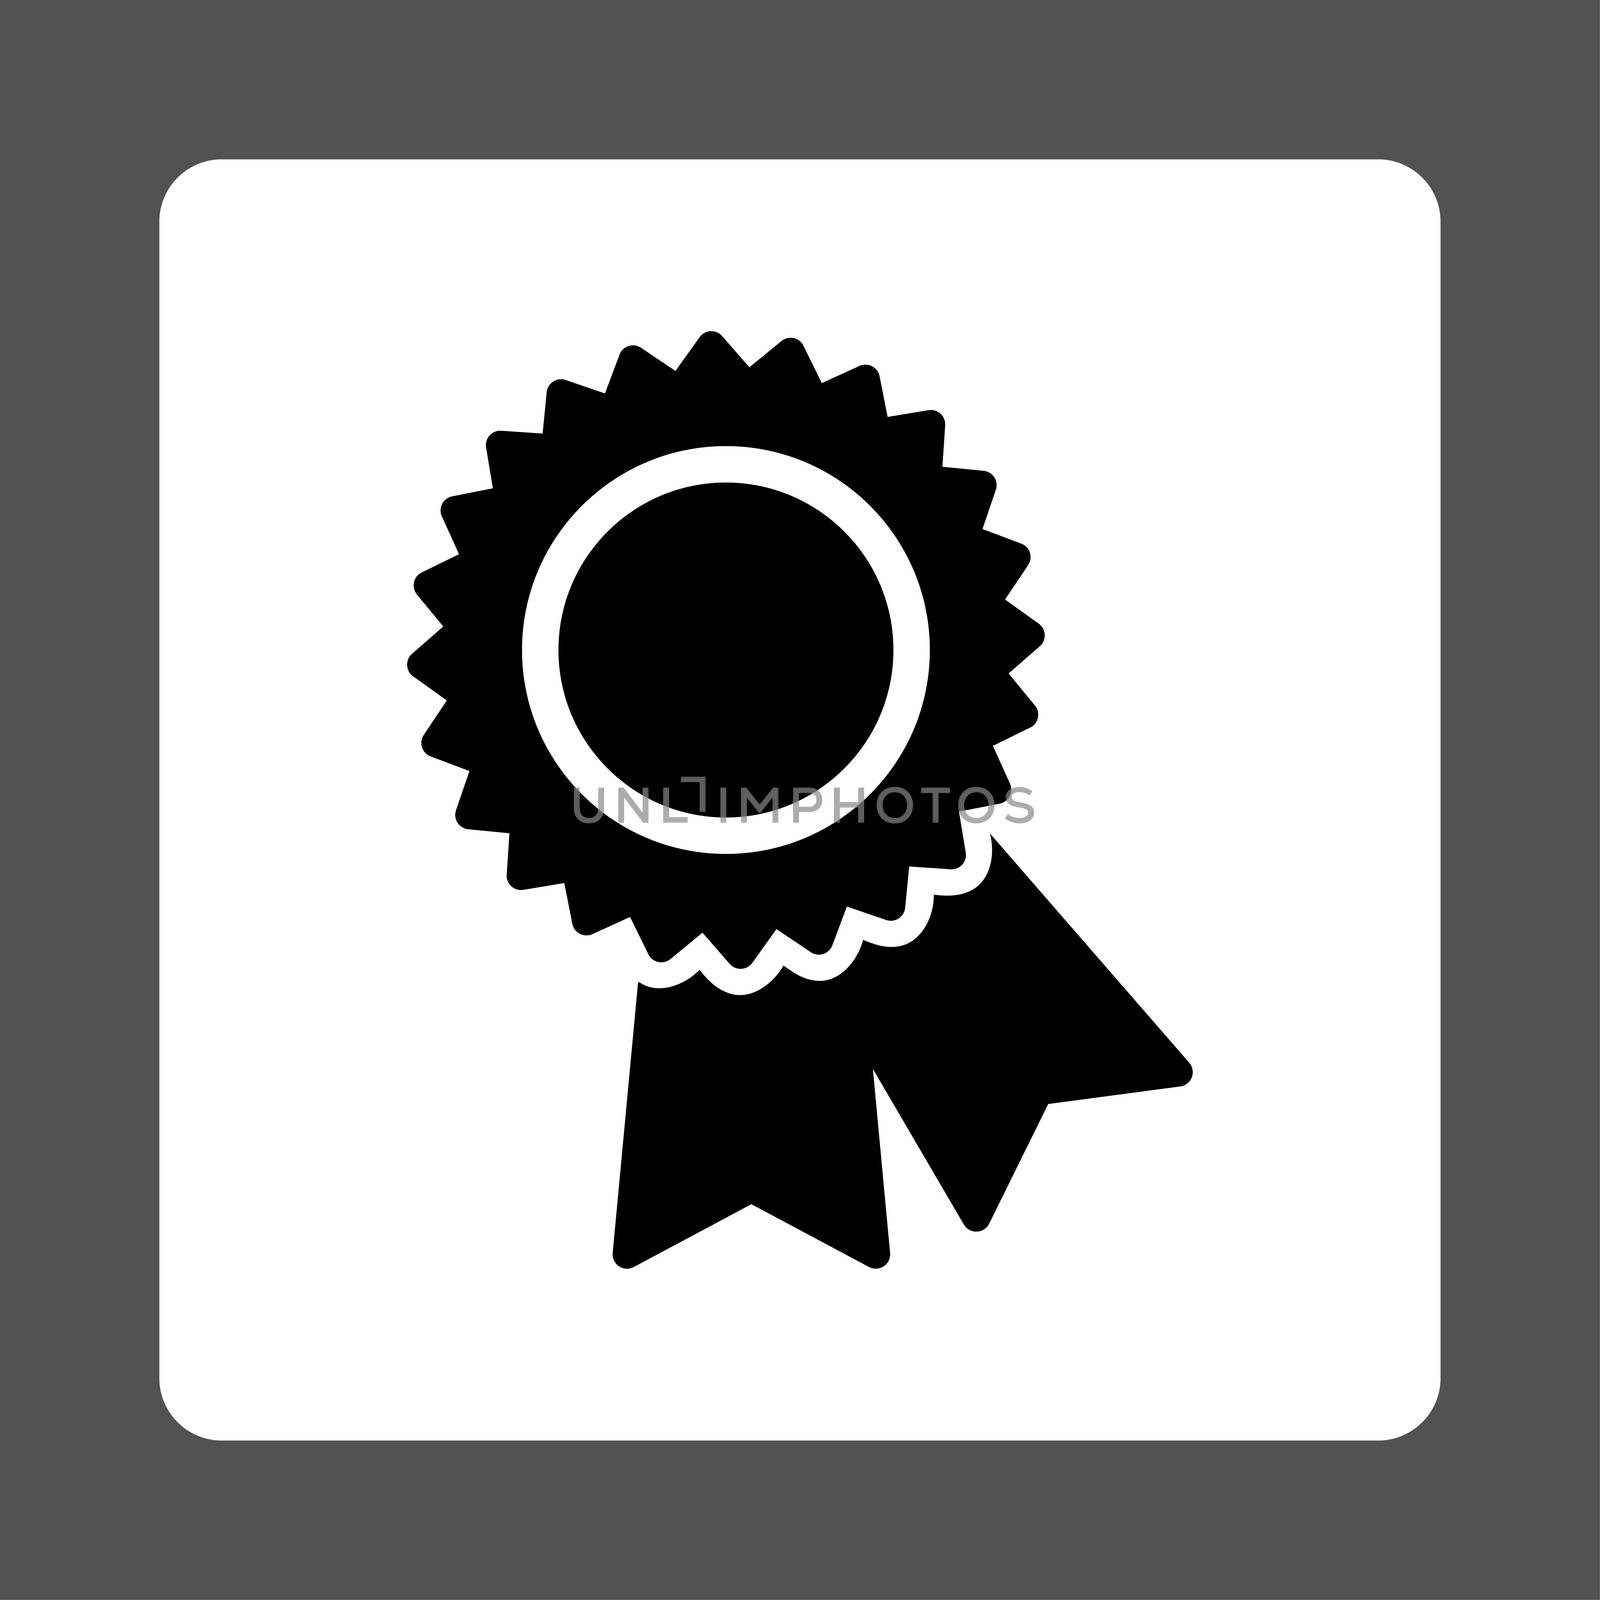 Certification icon from Award Buttons OverColor Set. Icon style is black and white colors, flat rounded square button, gray background.